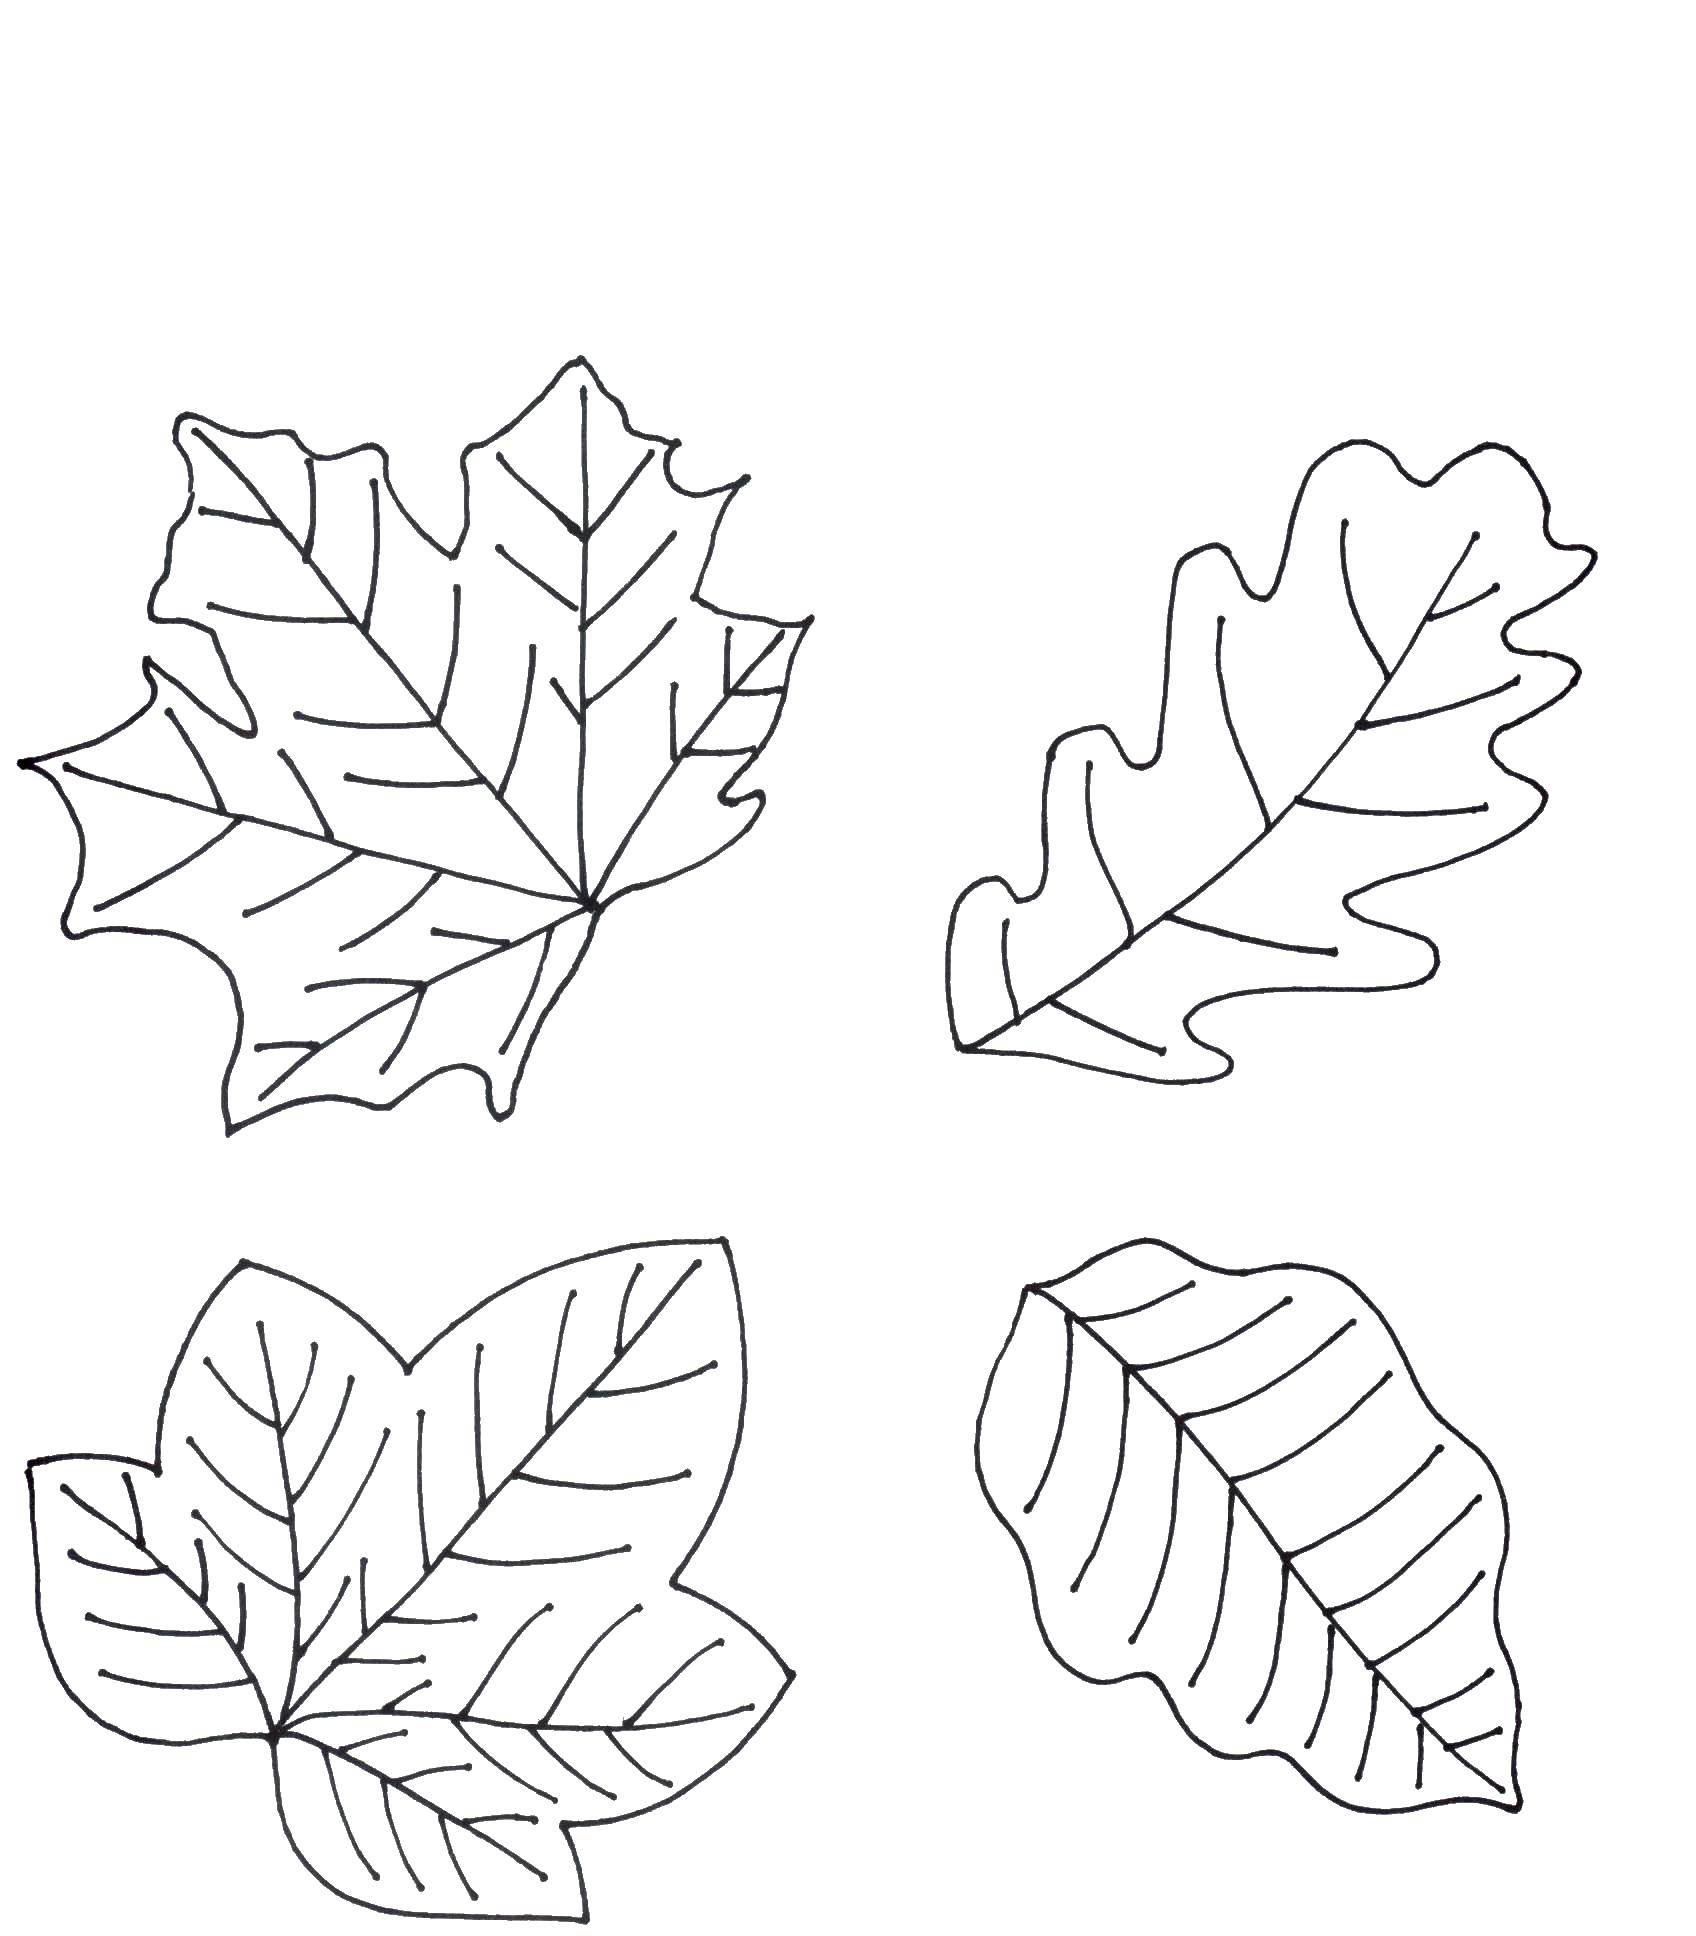 Coloring Leaves. Category tree. Tags:  trees, leaves, leaves.